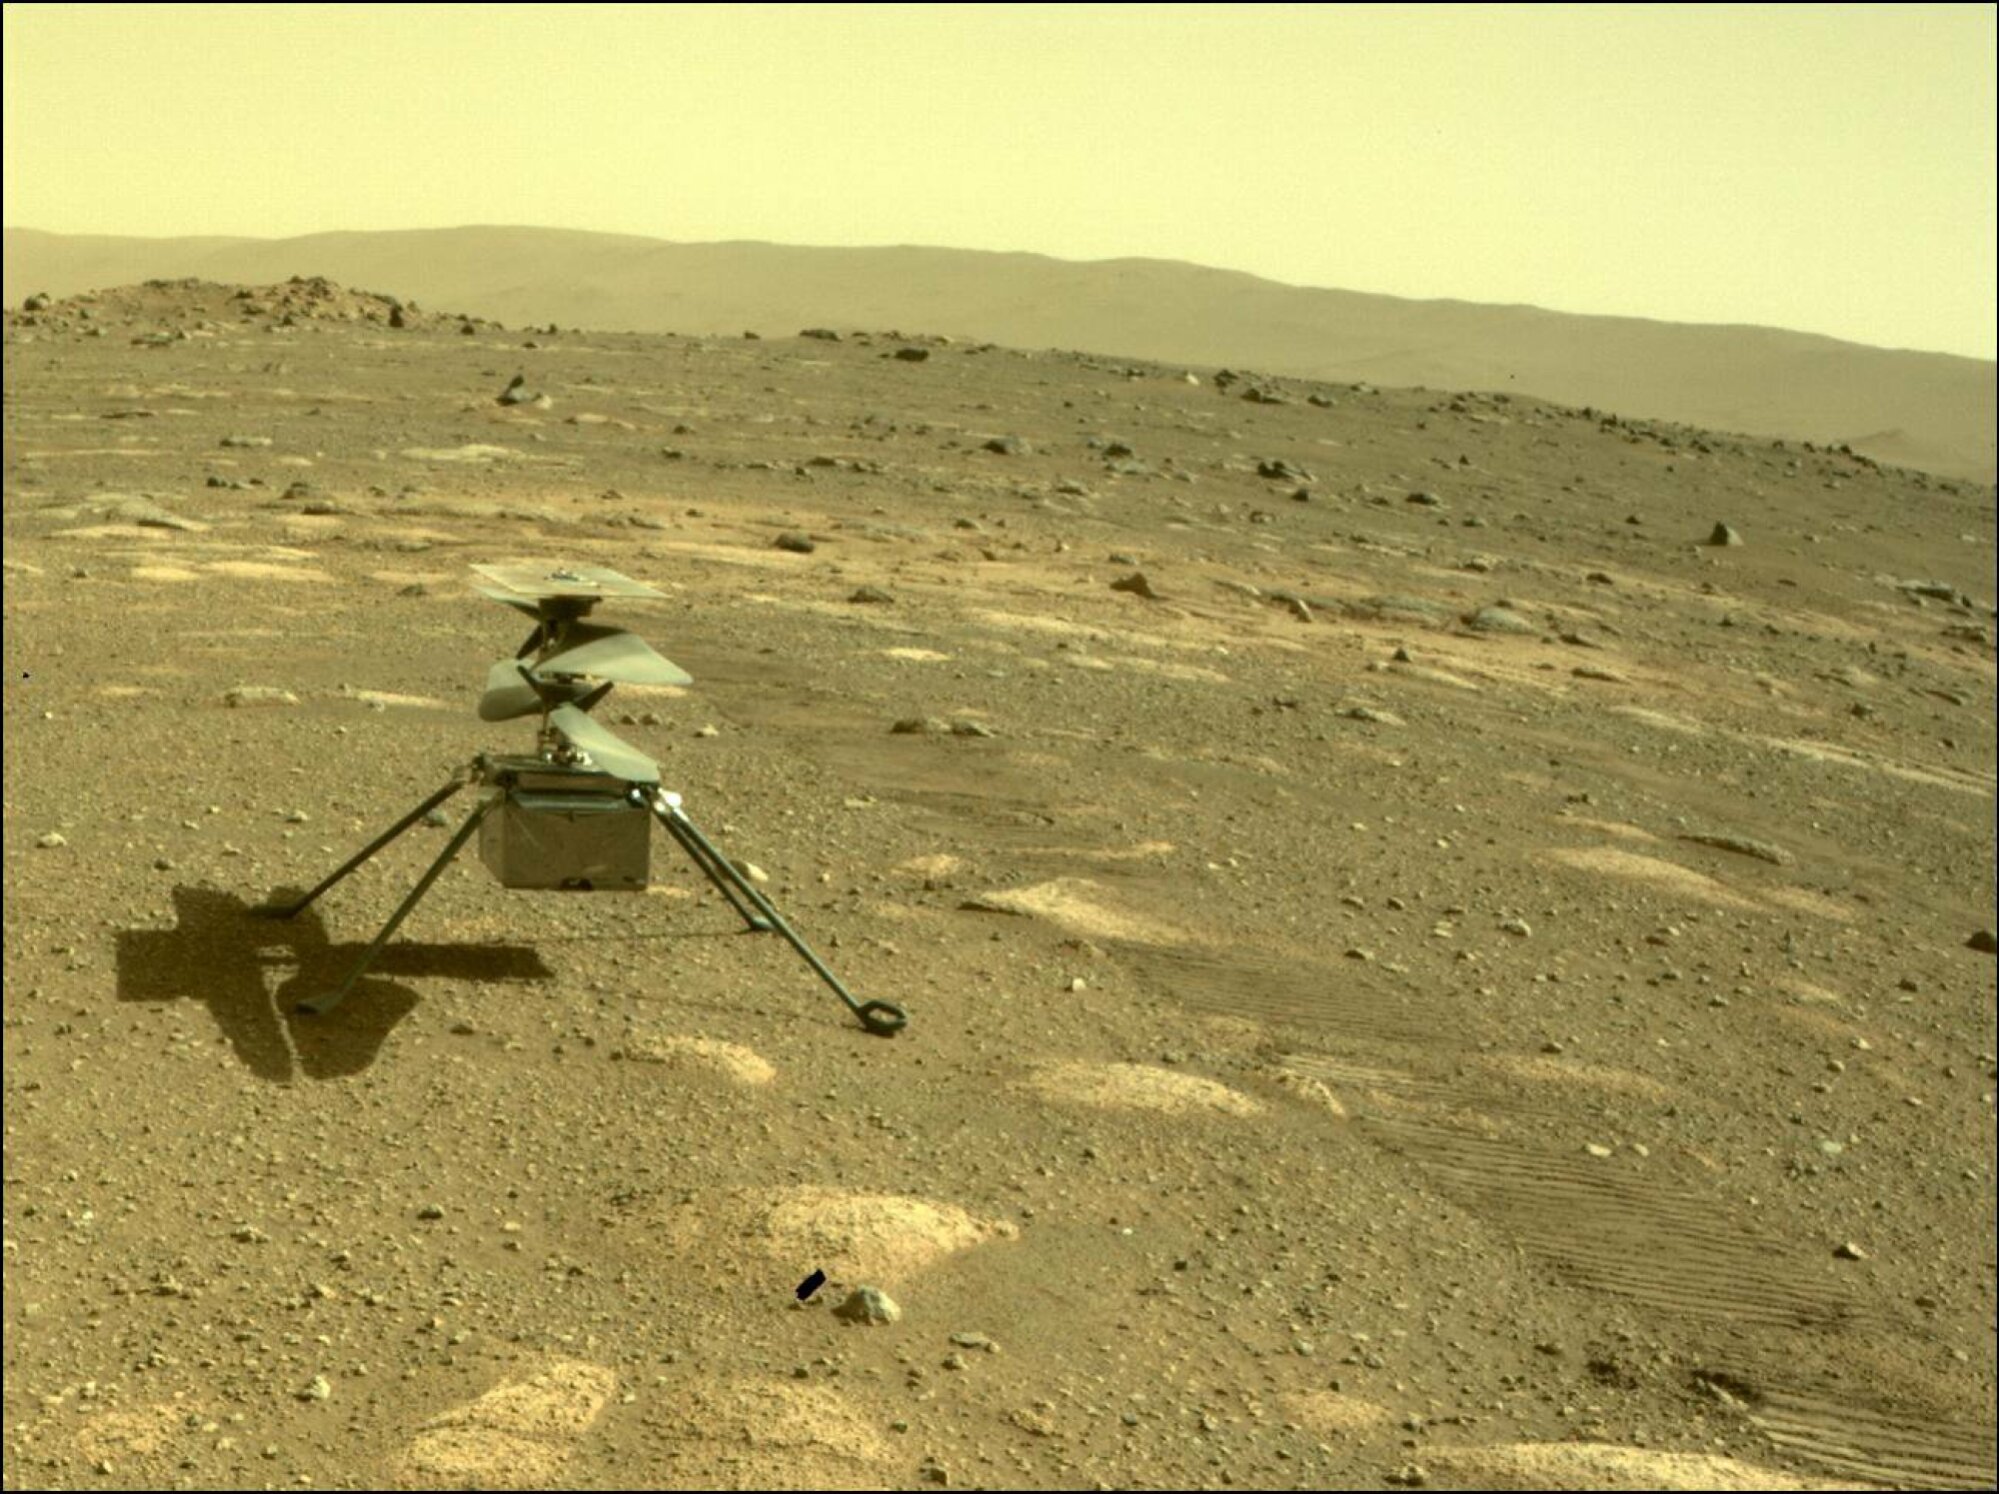 The Ingenuity helicopter on Mars, as seen from the Perseverance rover.